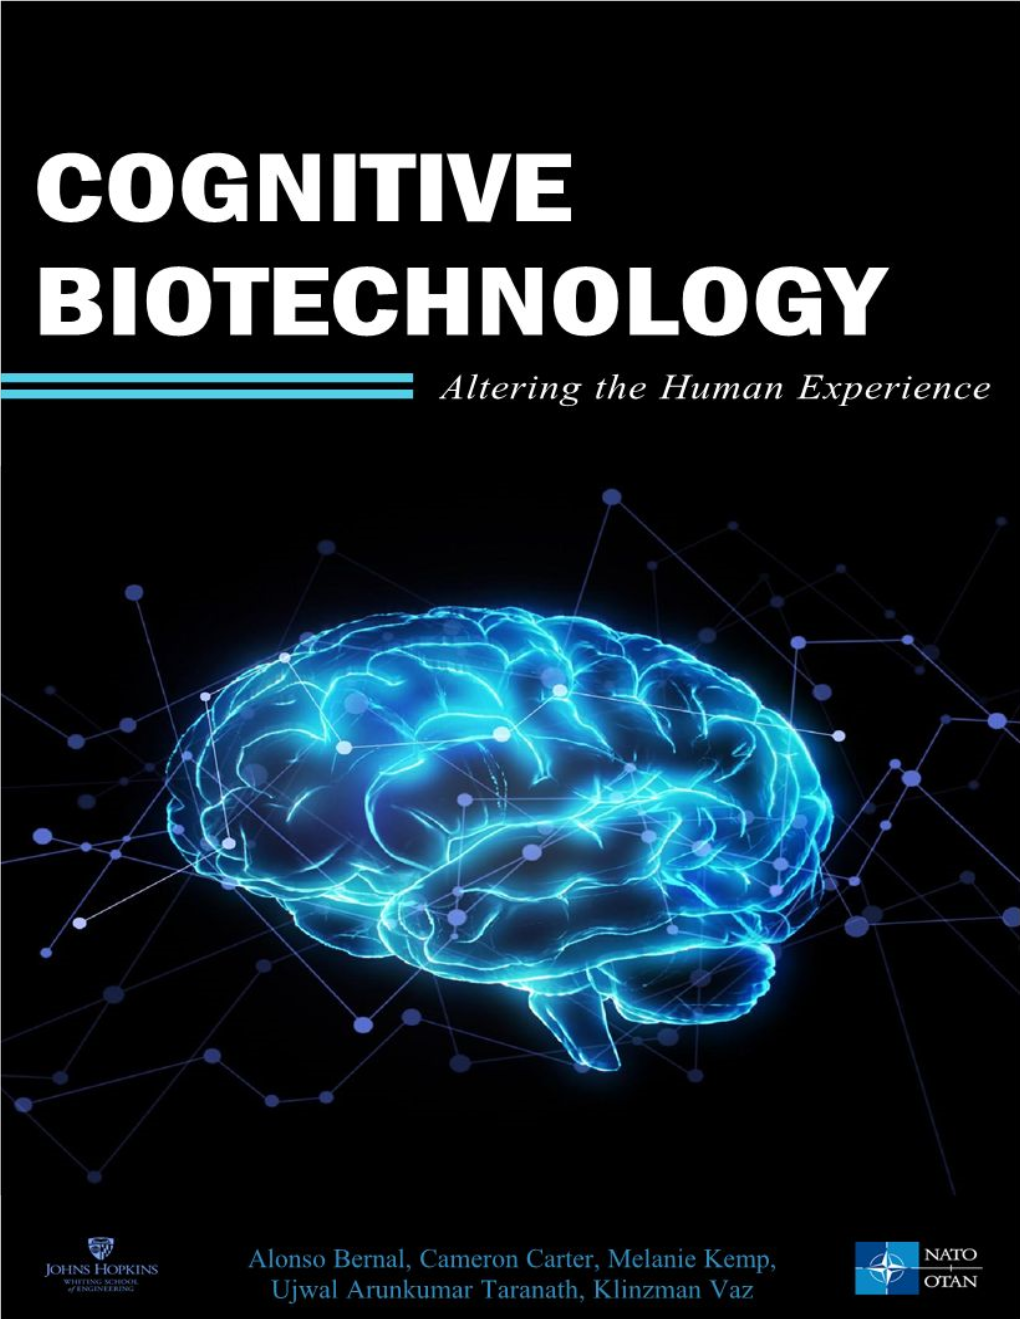 Cognitive Biotechnology Is Itself Nebulous, Being Part of an Emerging Field